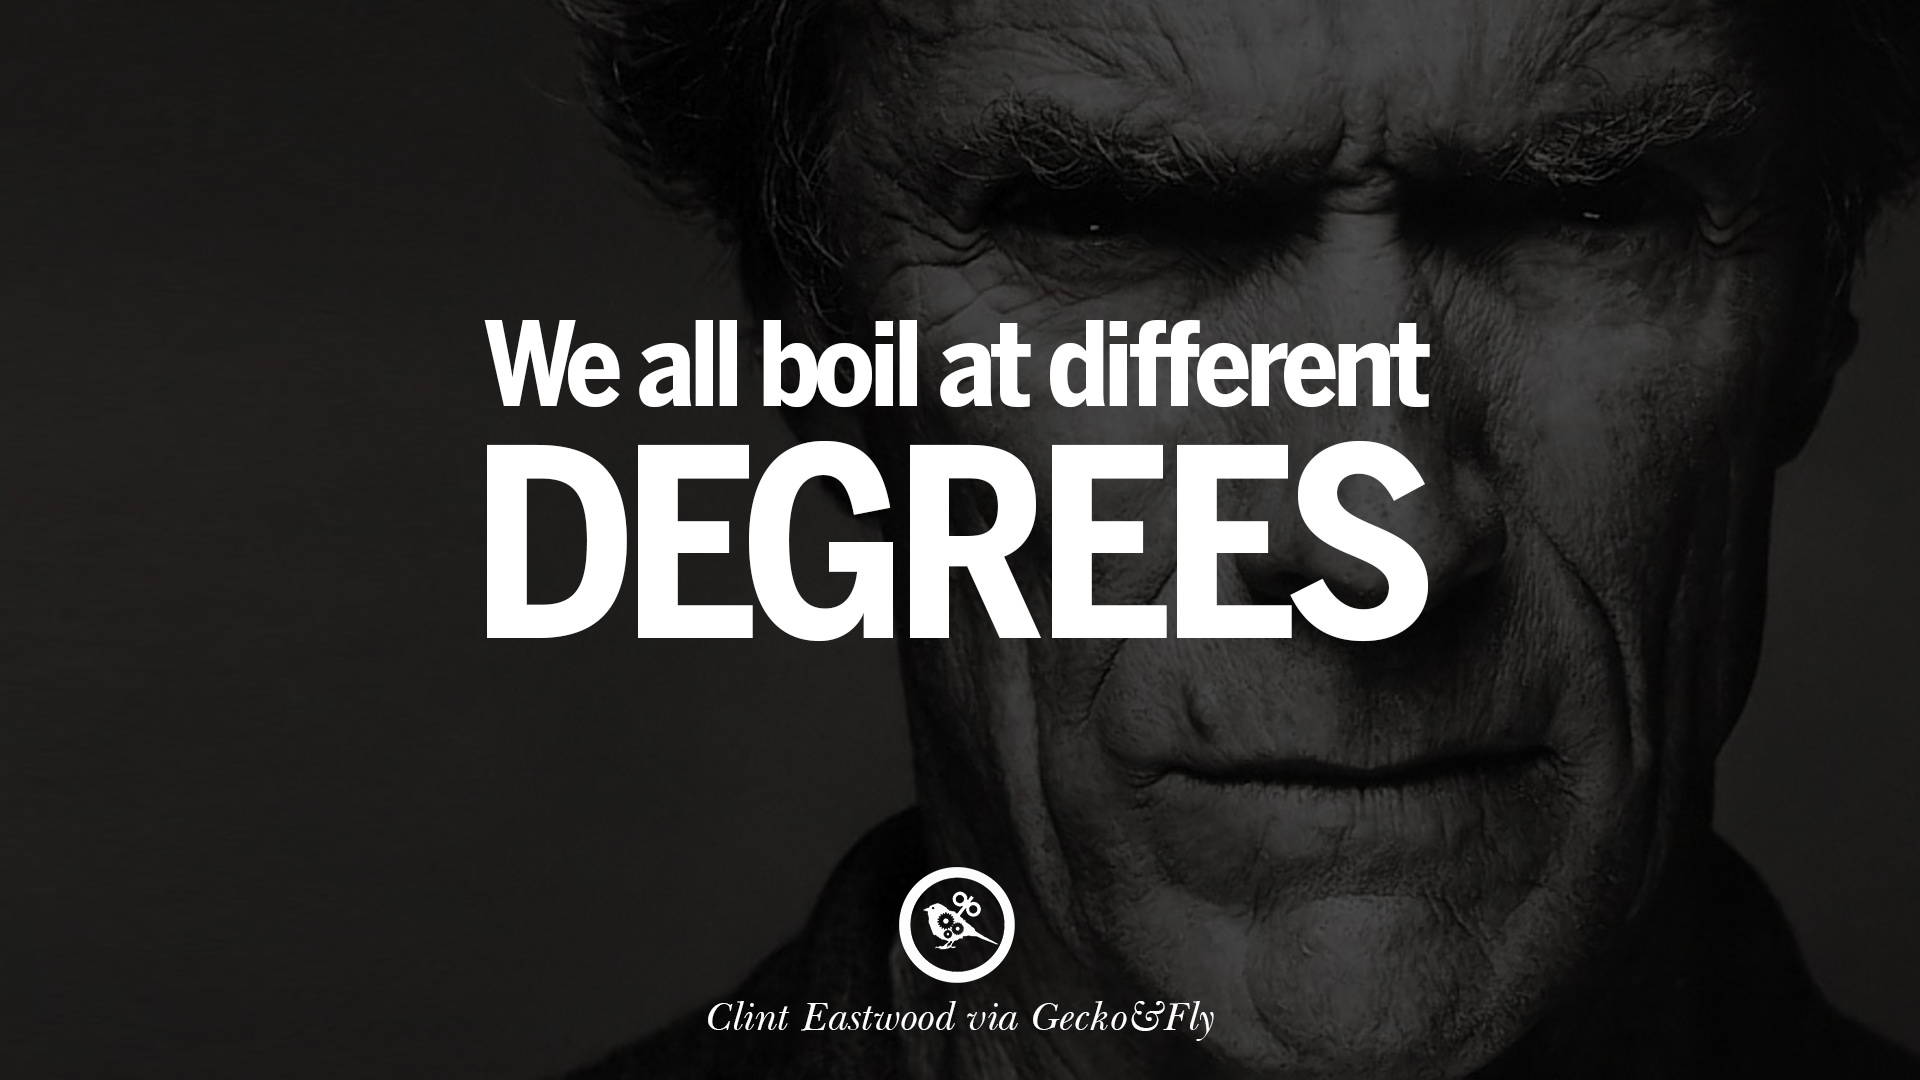 24 Inspiring Clint Eastwood Quotes On Politics, Life And Work